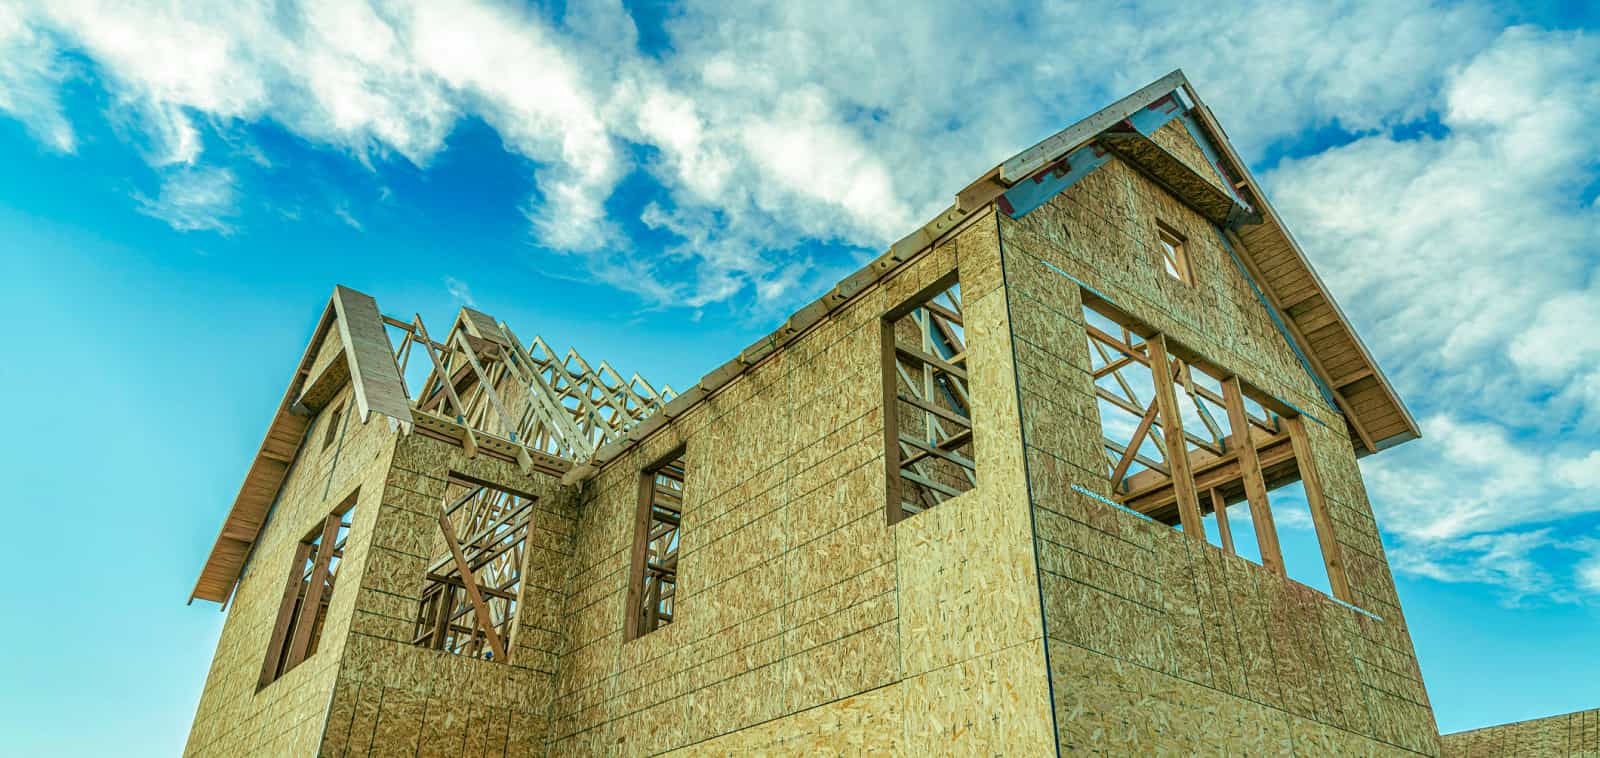 A view from below a partially constructed home looking up at a cloudy sky.